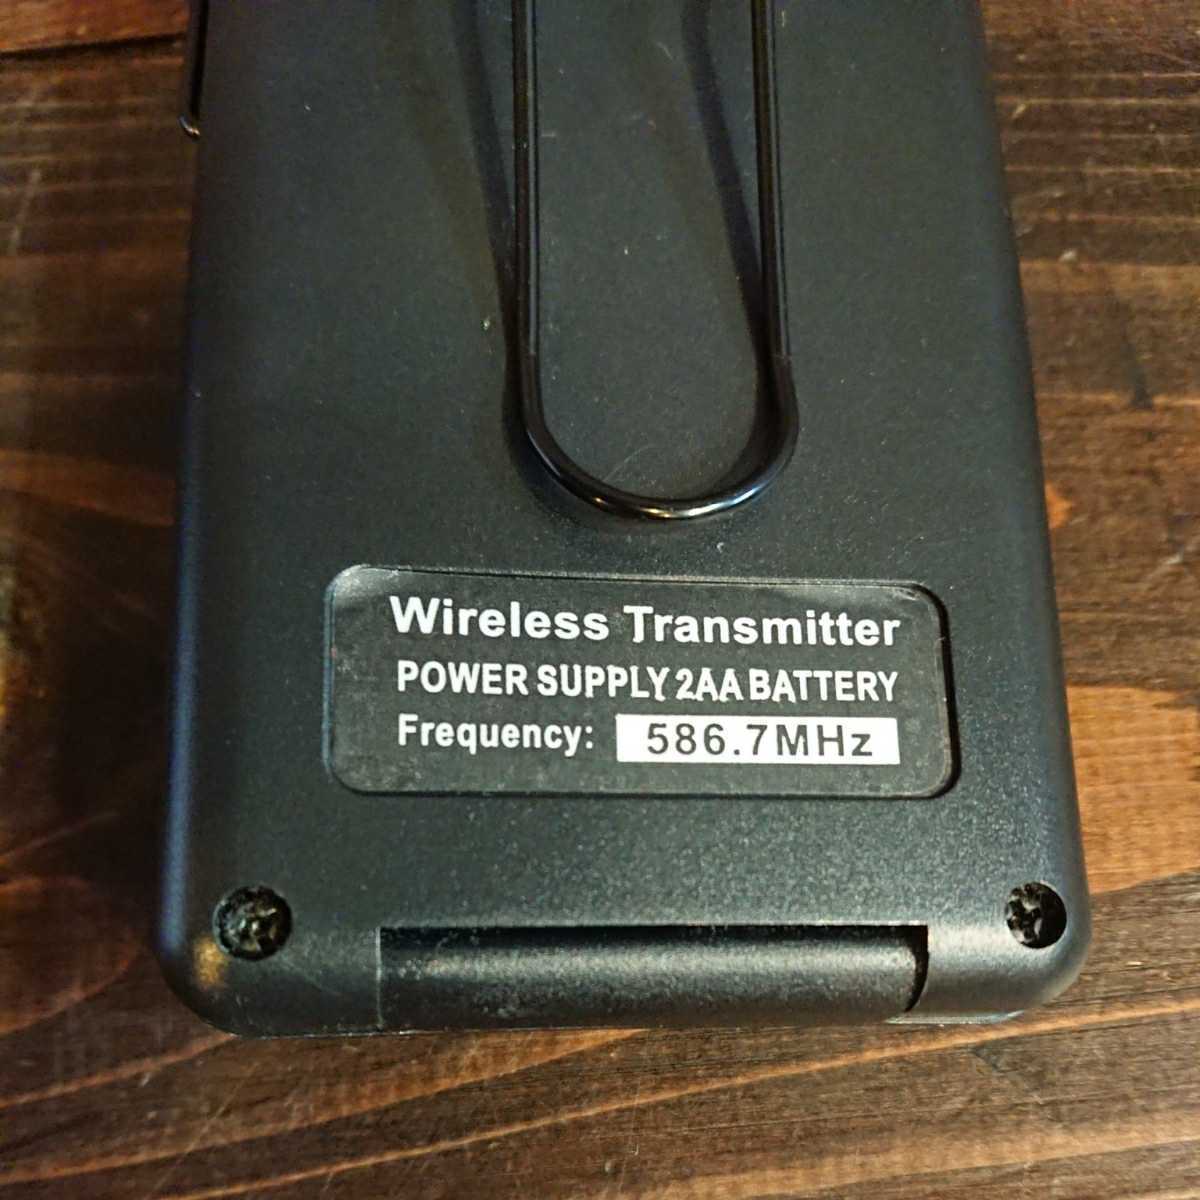 N3510 XTUGA 586.7MHz wireless transmitter hand Mike pin Mike electrification has confirmed single 3 battery 2 piece use postage nationwide equal 300 jpy 